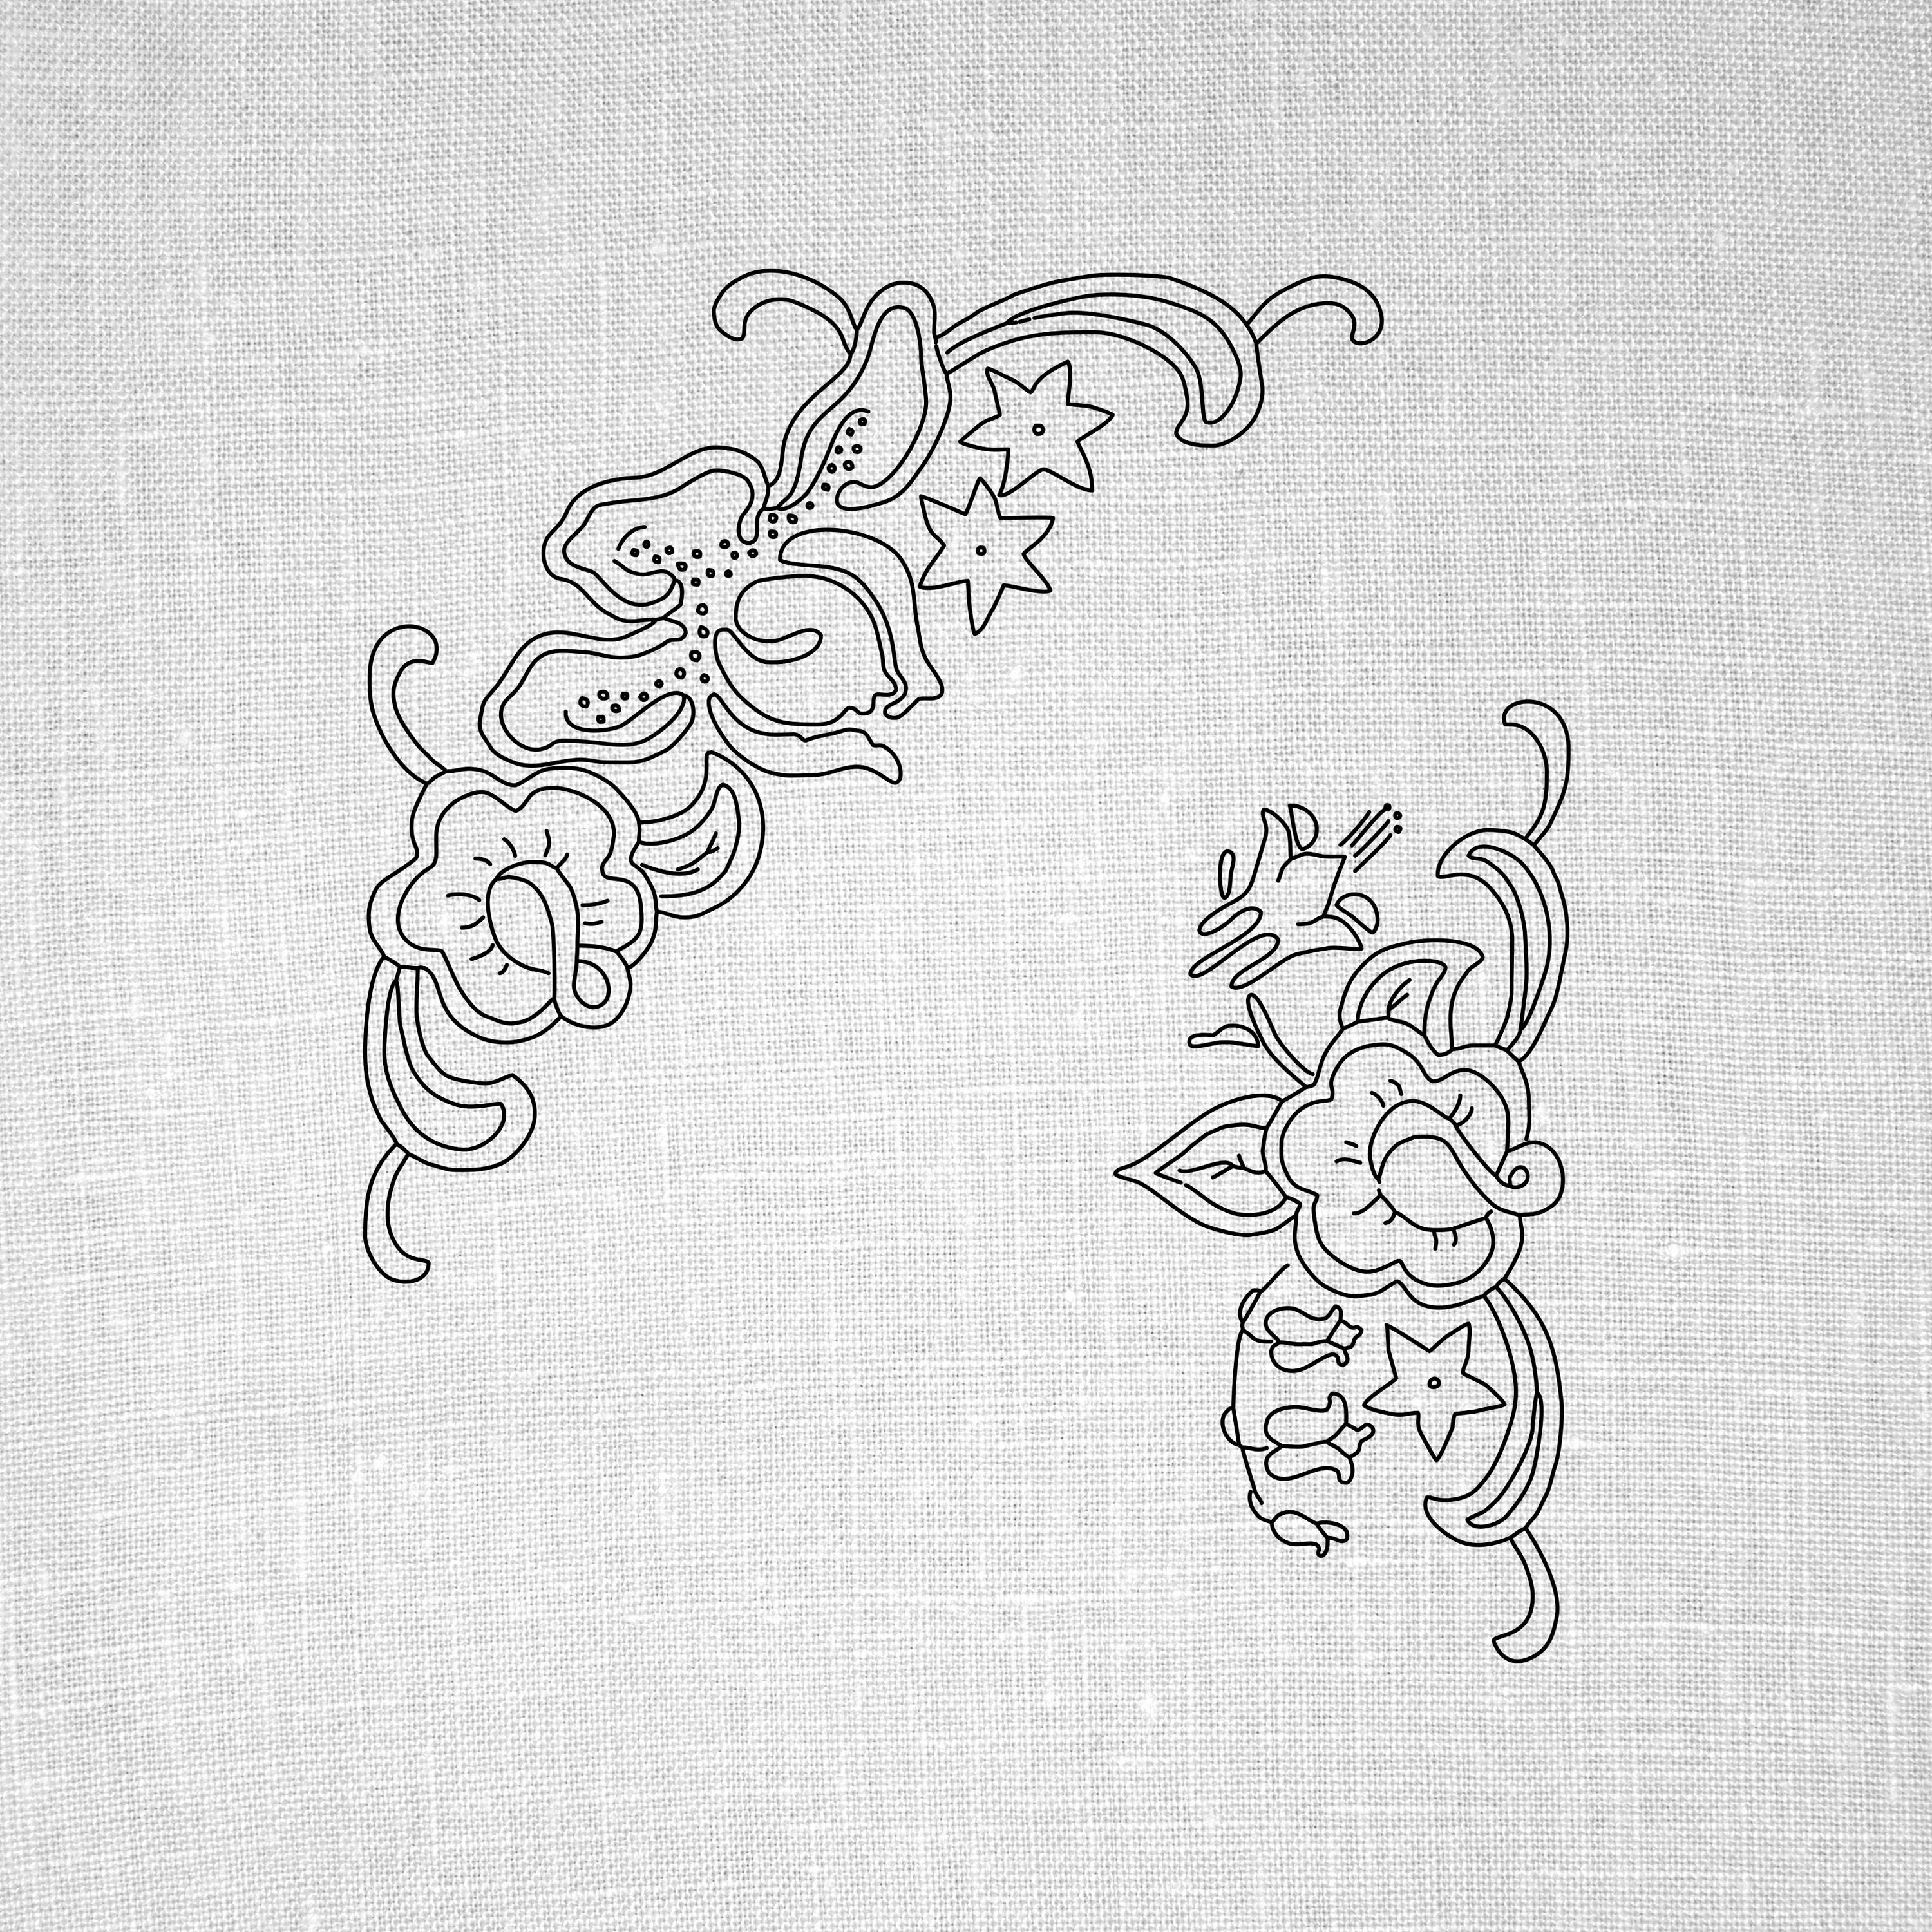 Hand Embroidery Patterns Free Vintage Hand Embroidery Borders Hand Embroidery Embroidery Design Hand Embroidery Patterns Pdf Vintage Transfers Cowboy Border